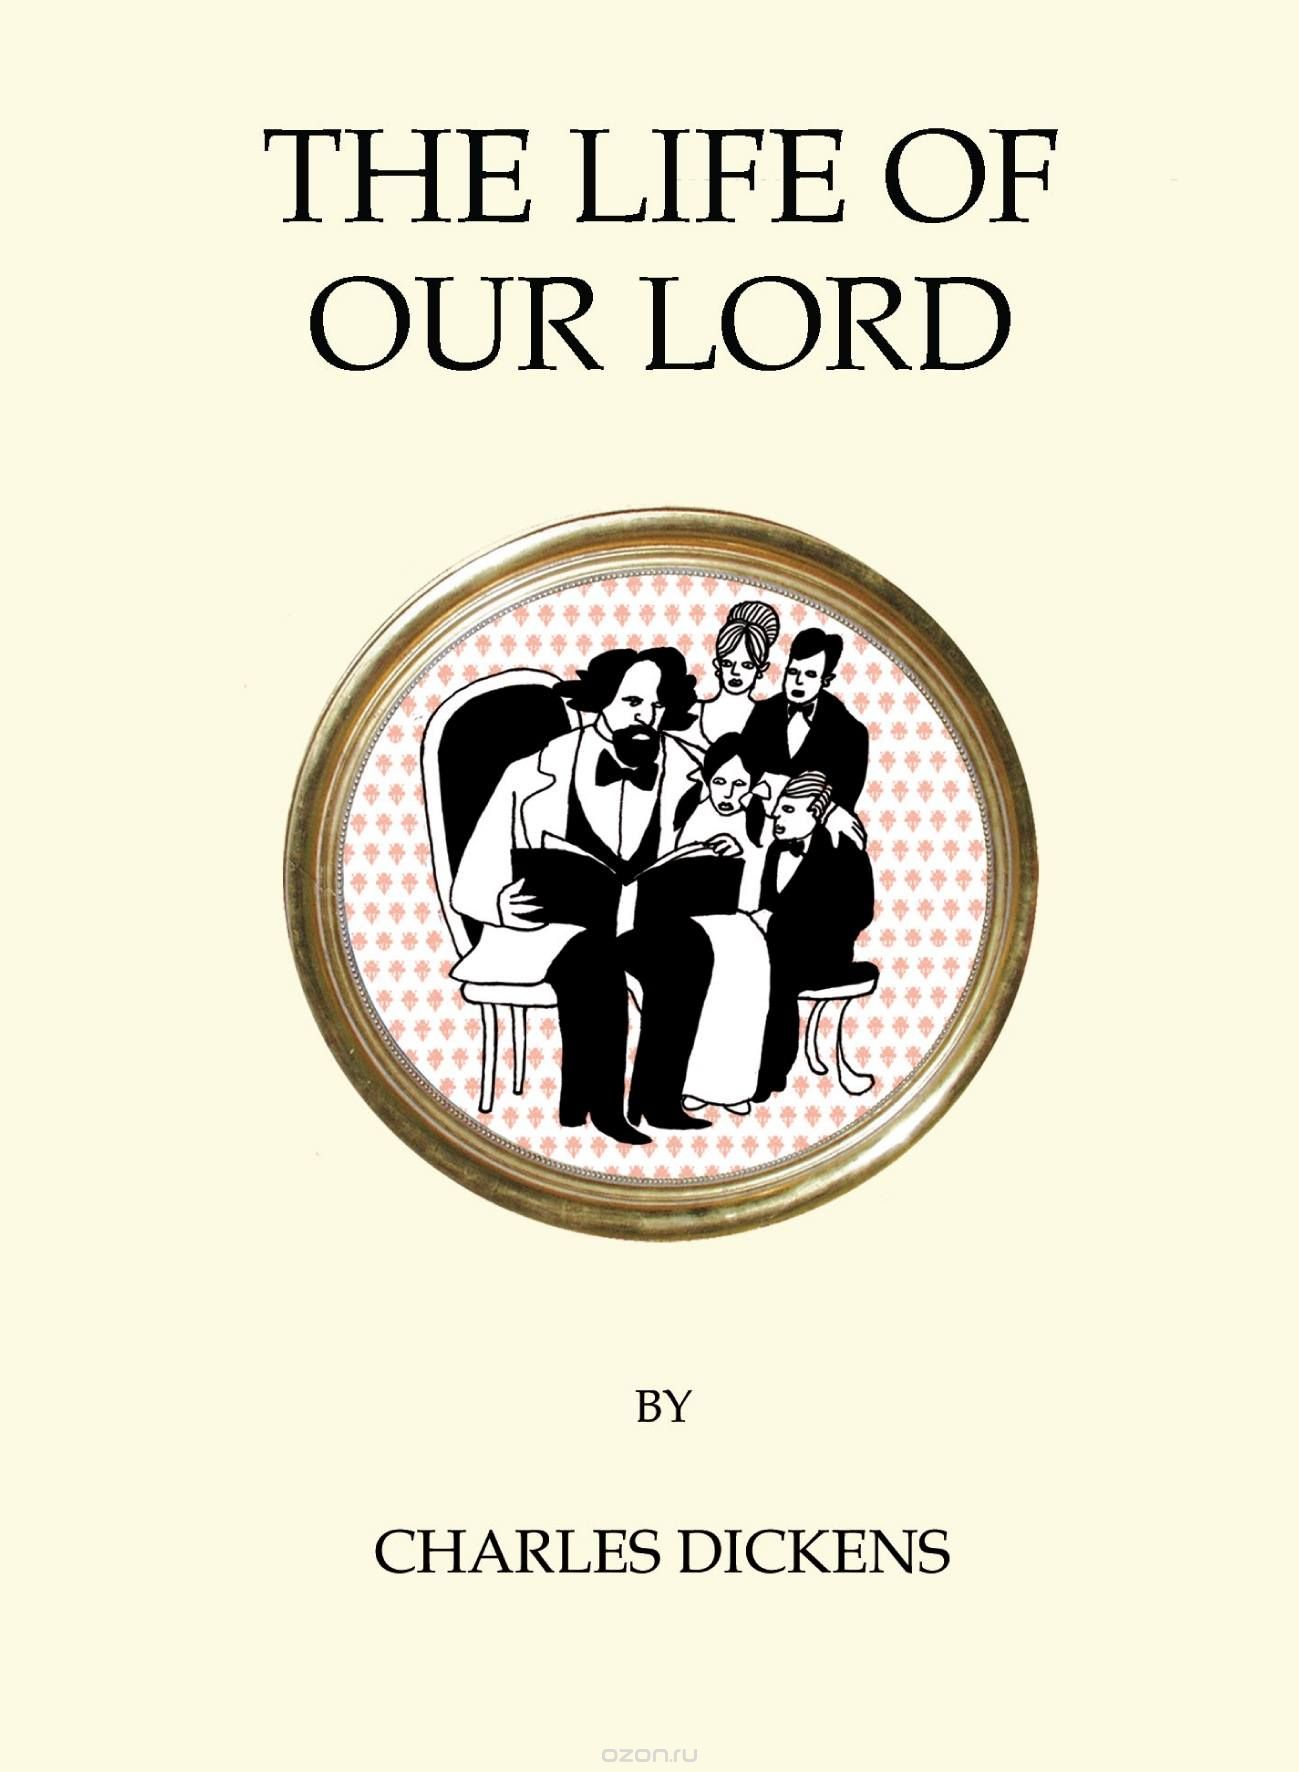 Скачать книгу "The Life of Our Lord"